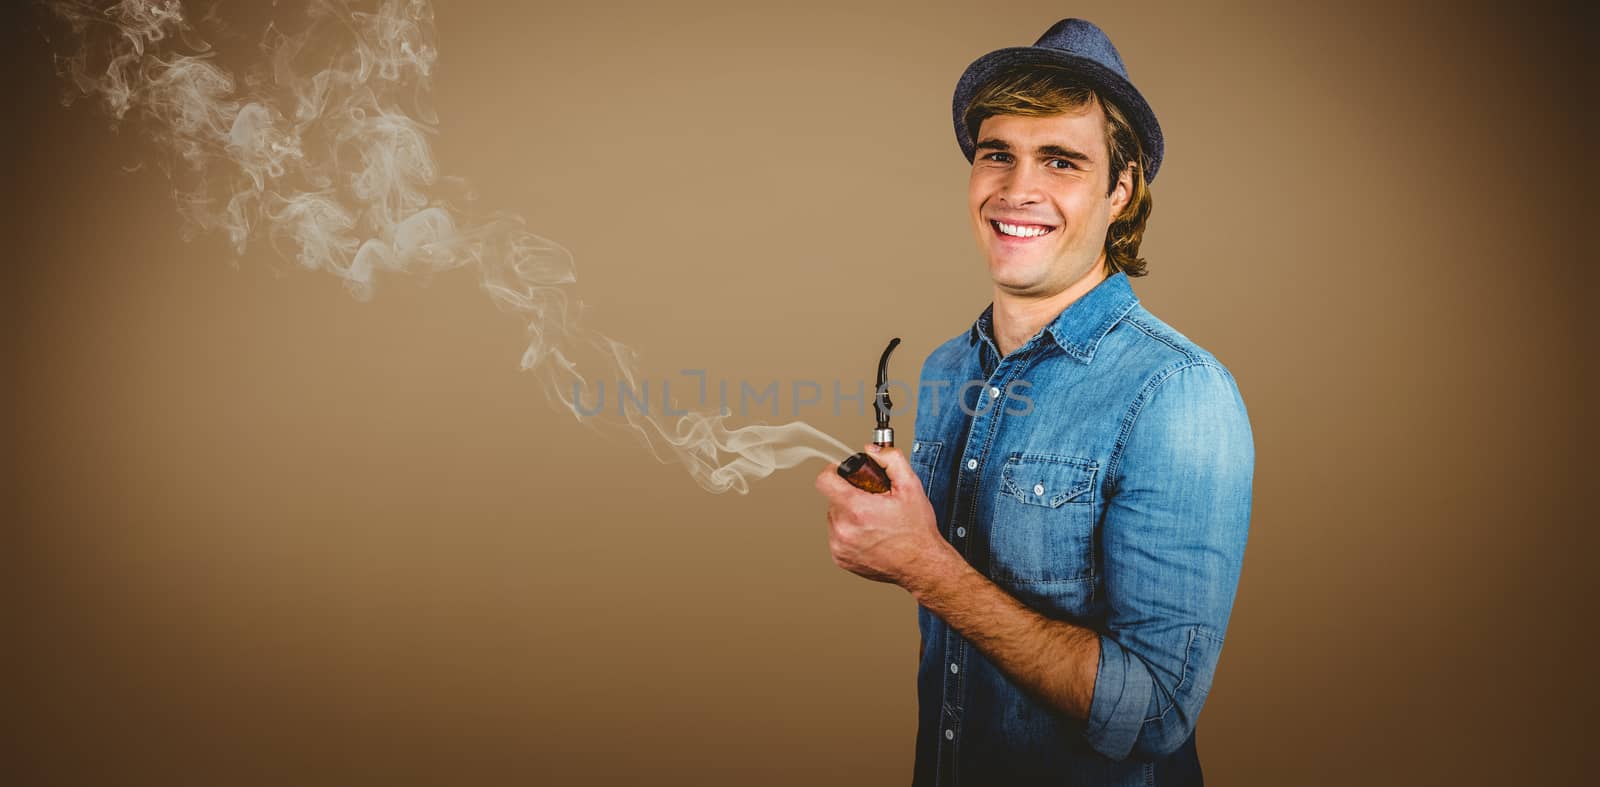 Cheerful hipster holding pipe against grey background with vignette